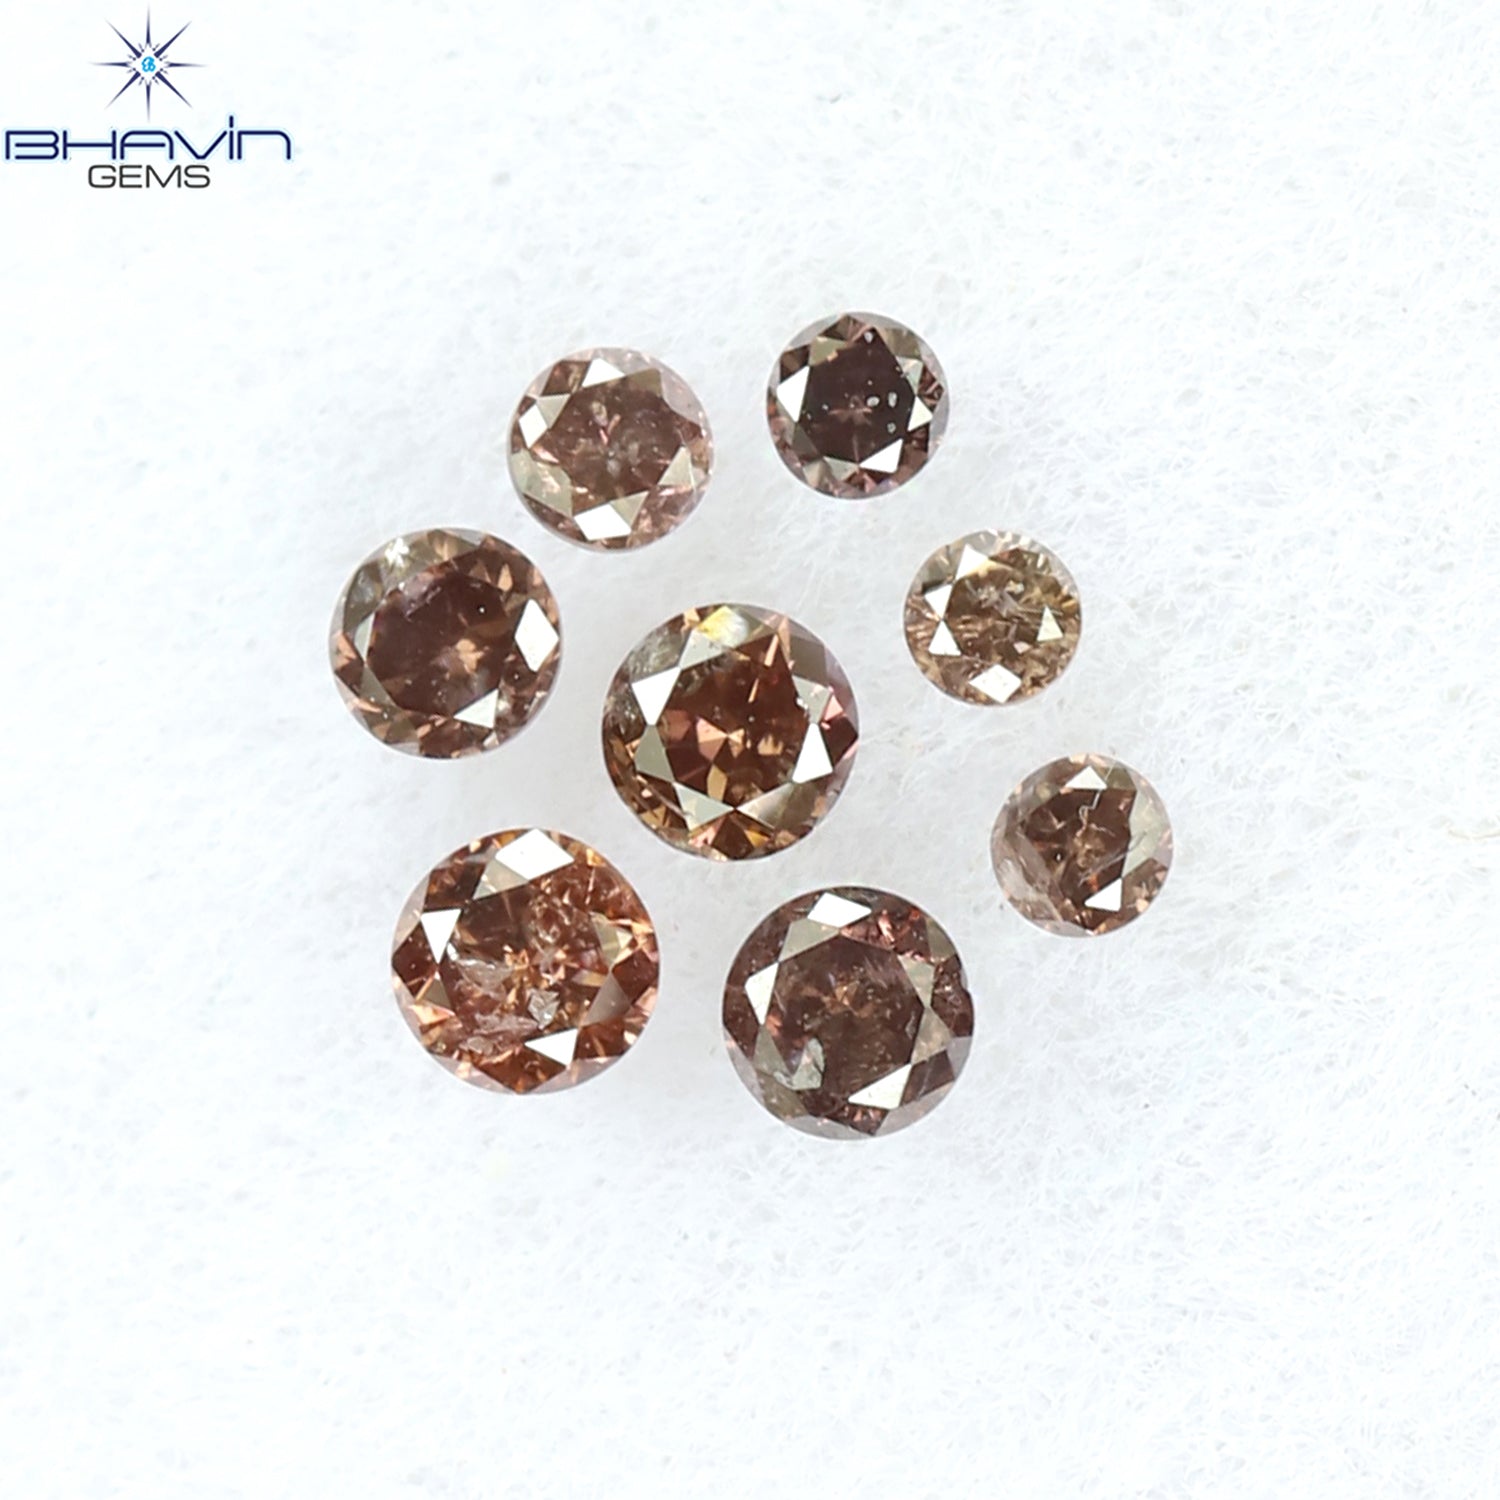 0.11 CT/8 Pcs Round Shape Natural Loose Diamond Brown Pink Color I1 Clarity (1.70 MM)